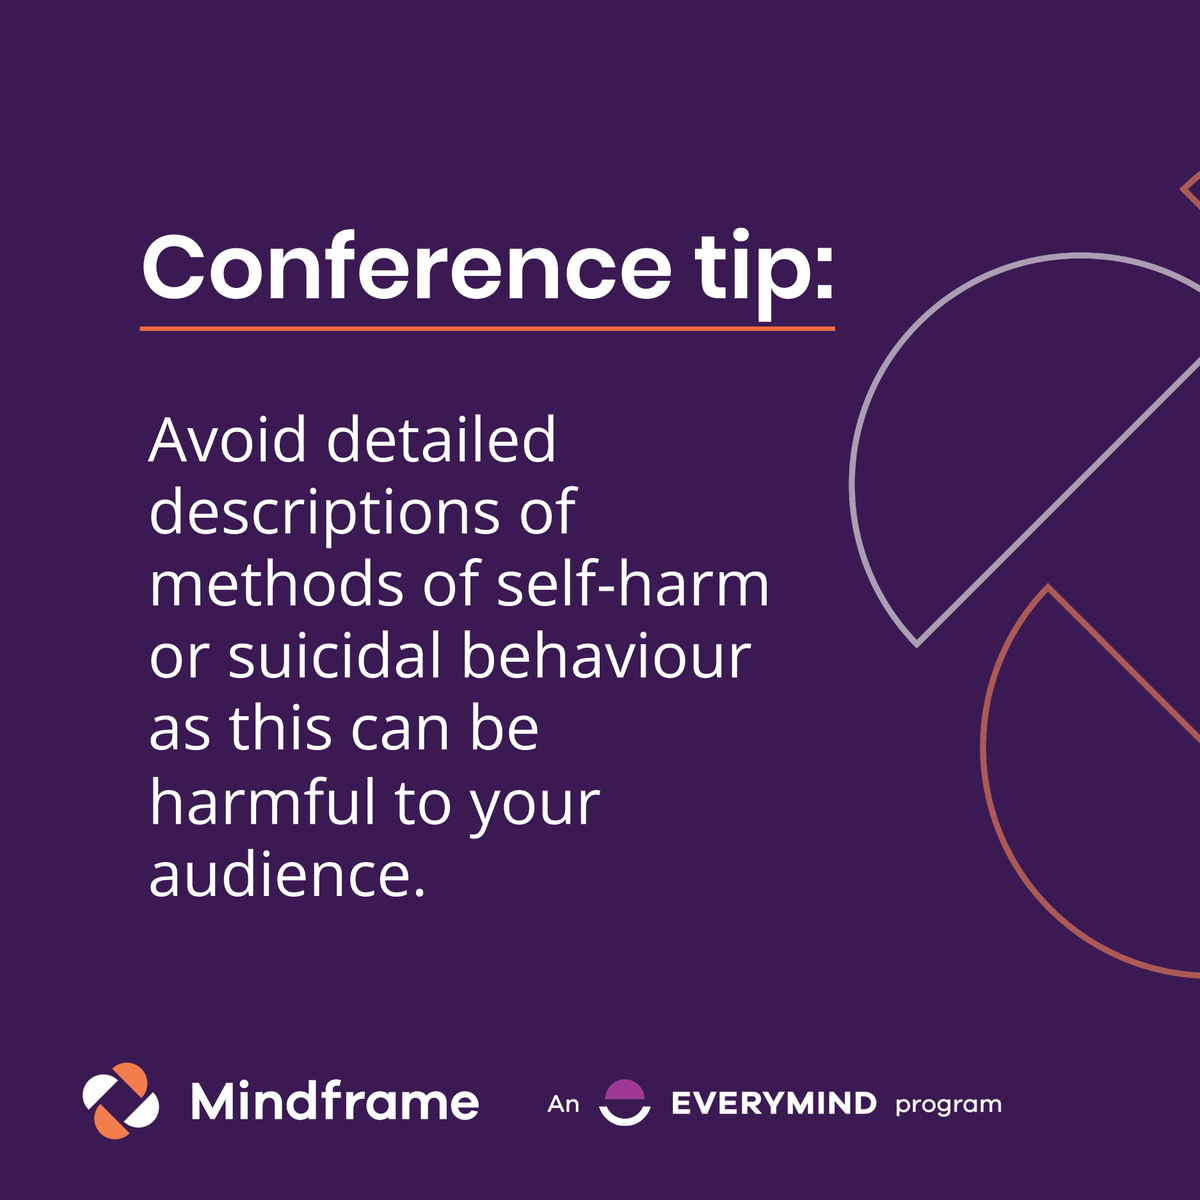 Good morning to all attending #NSPC24 in Adelaide this week! Delegates are reminded of the powerful role of language & images when communicating about #suicide. Mindframe has a free quick reference guide for anyone presenting or taking part in conference discussions that features